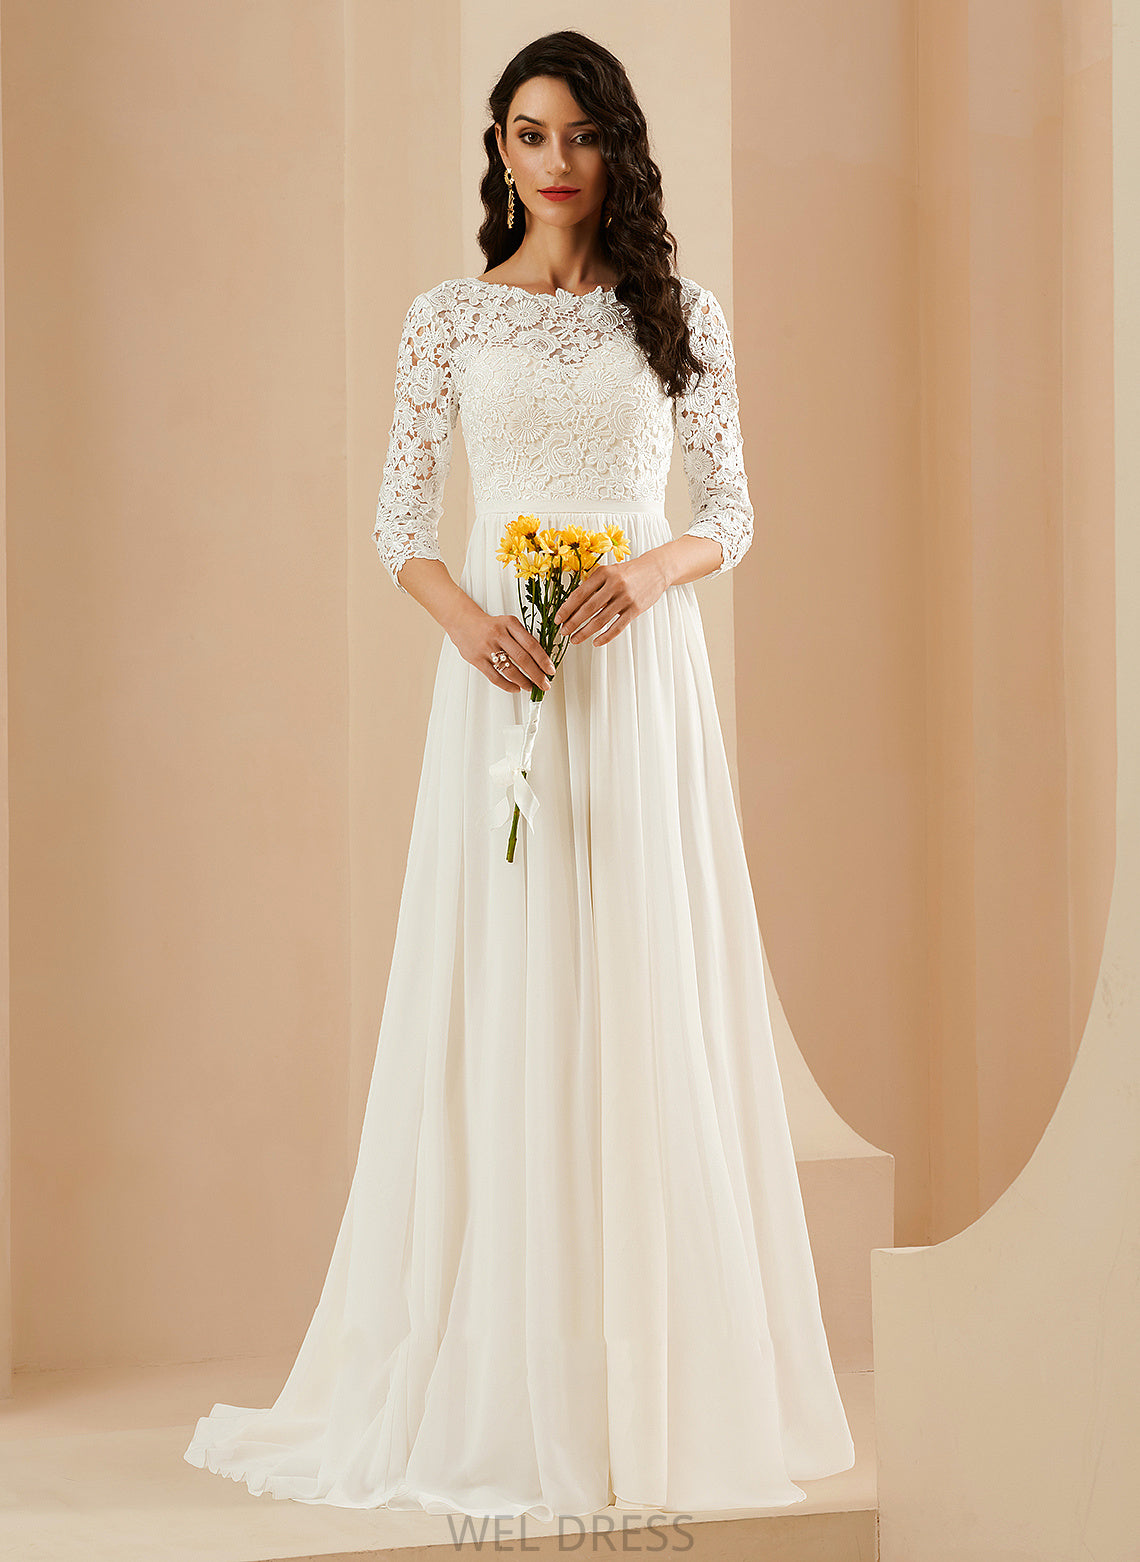 Wedding Abbigail Dress With Lace Sweep Train Wedding Dresses A-Line